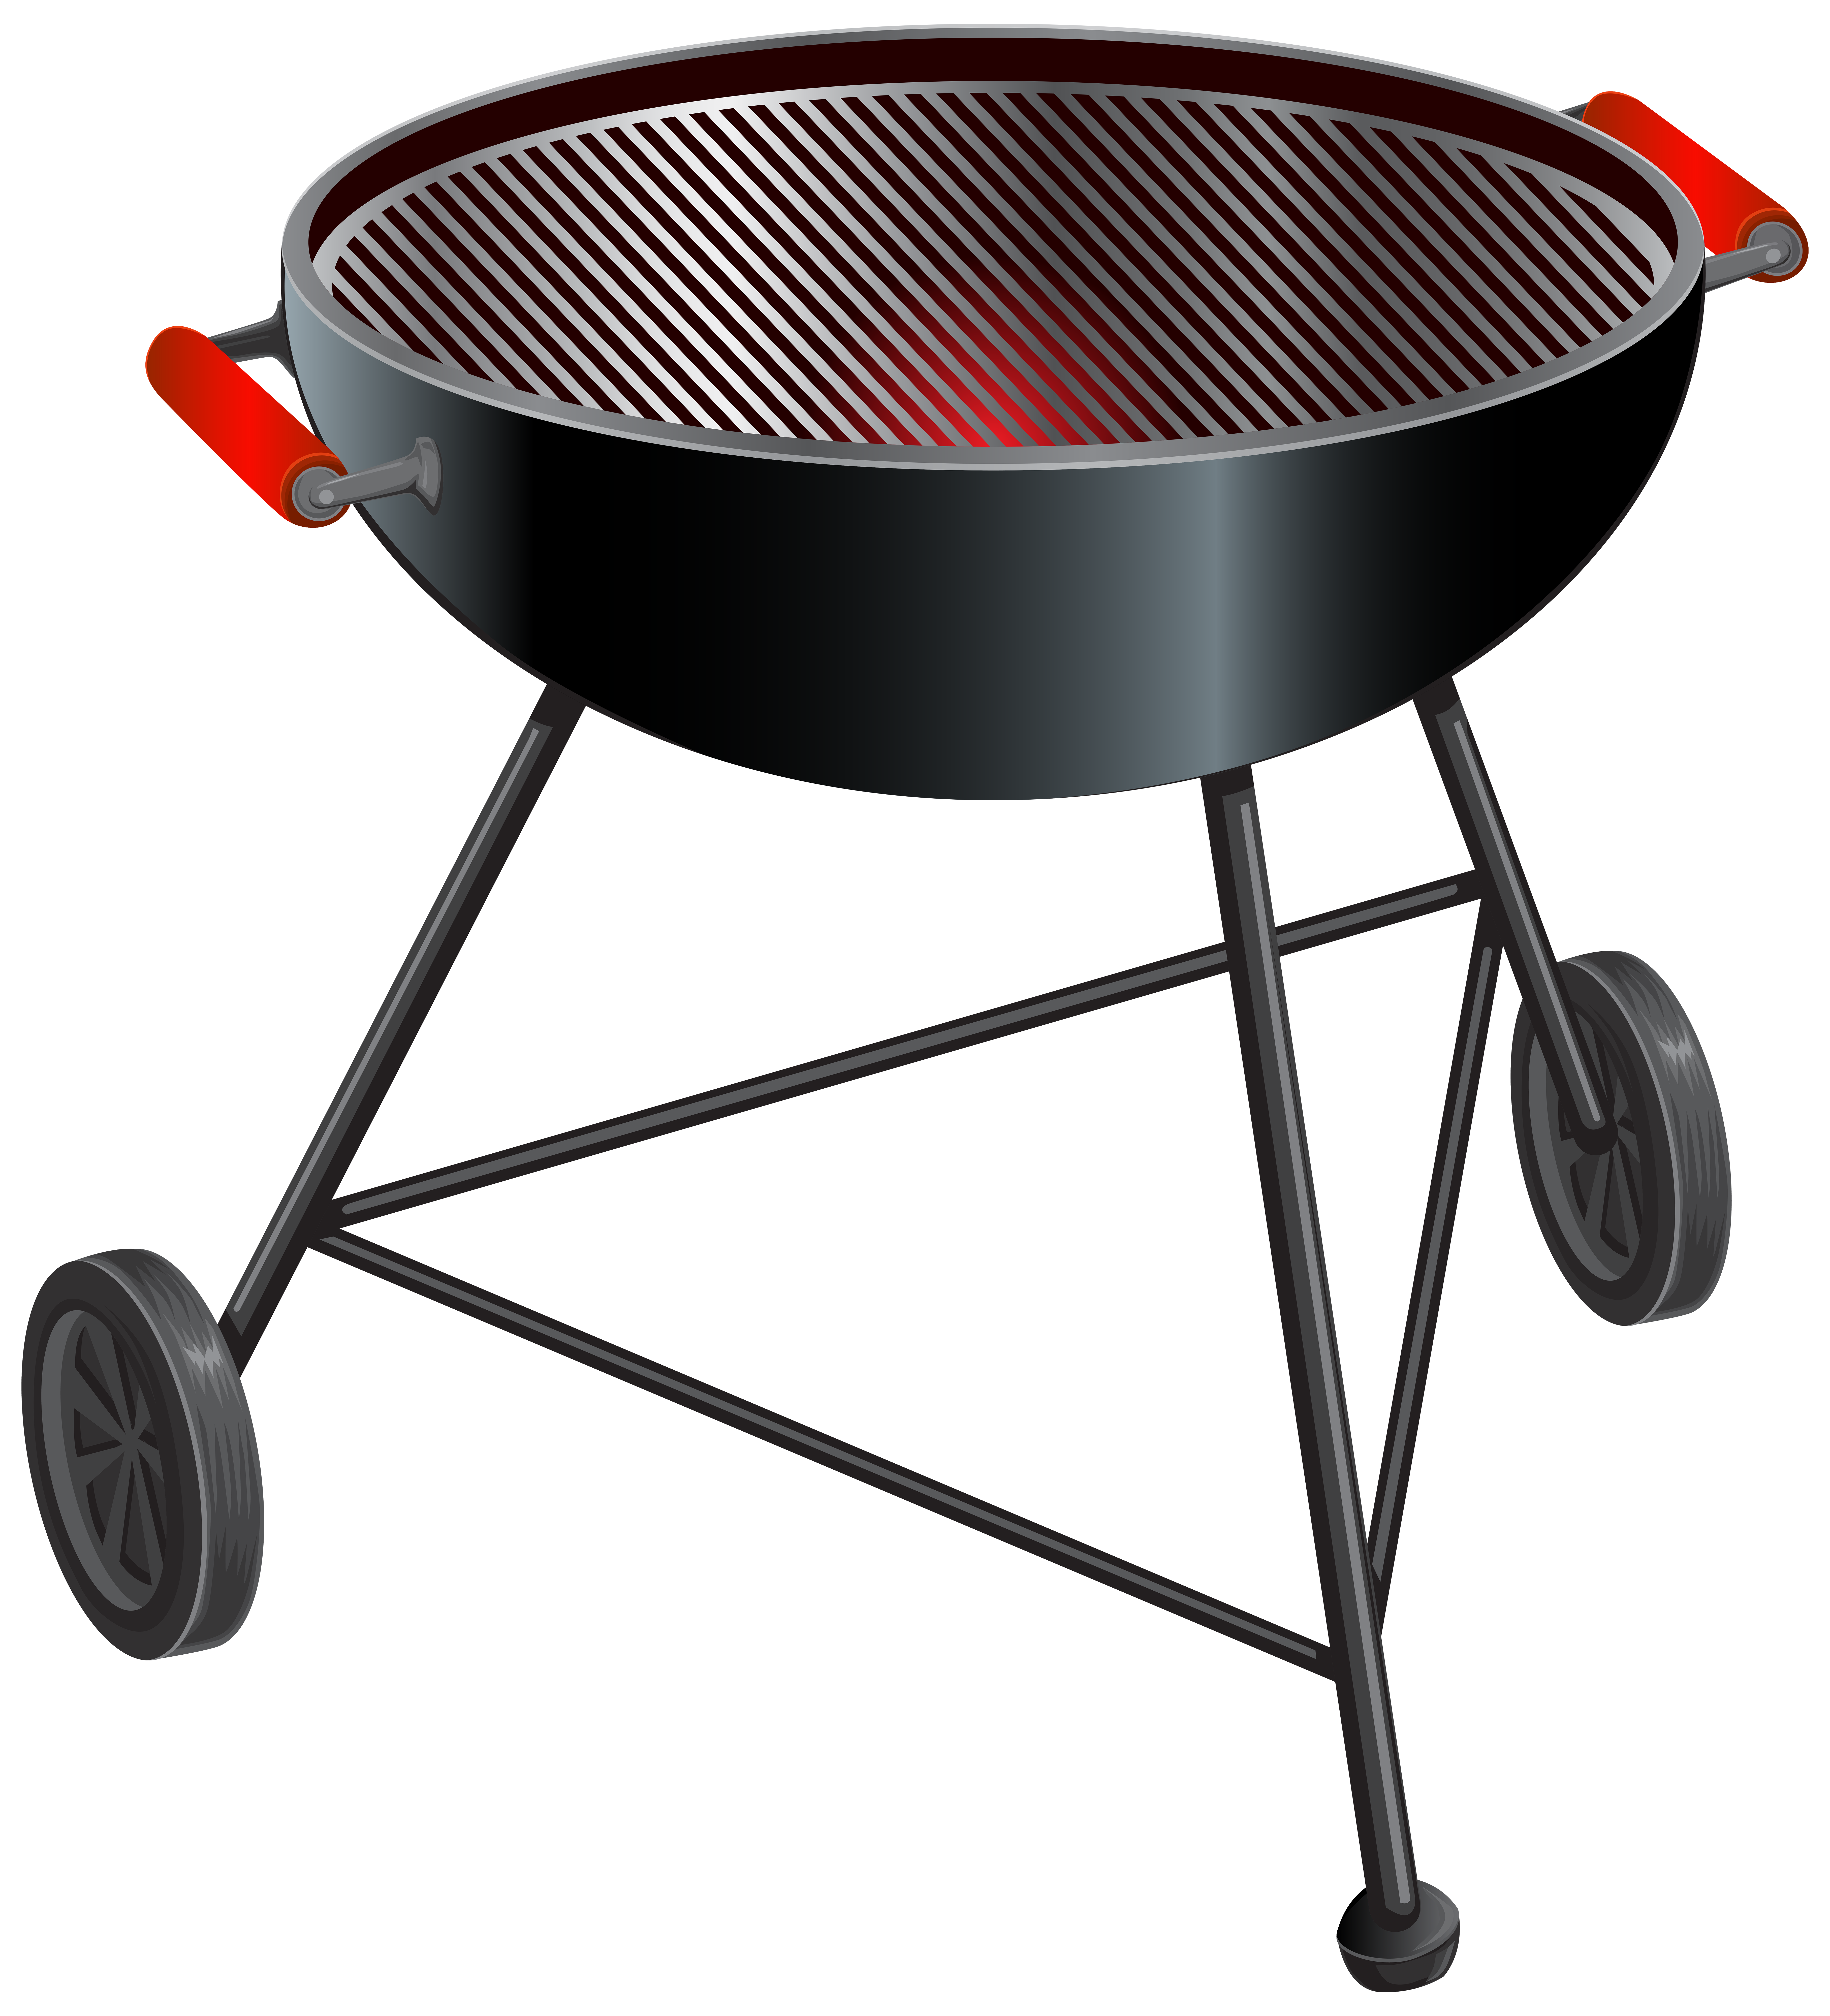 Grilling clipart bbq lunch. Grill jokingart com